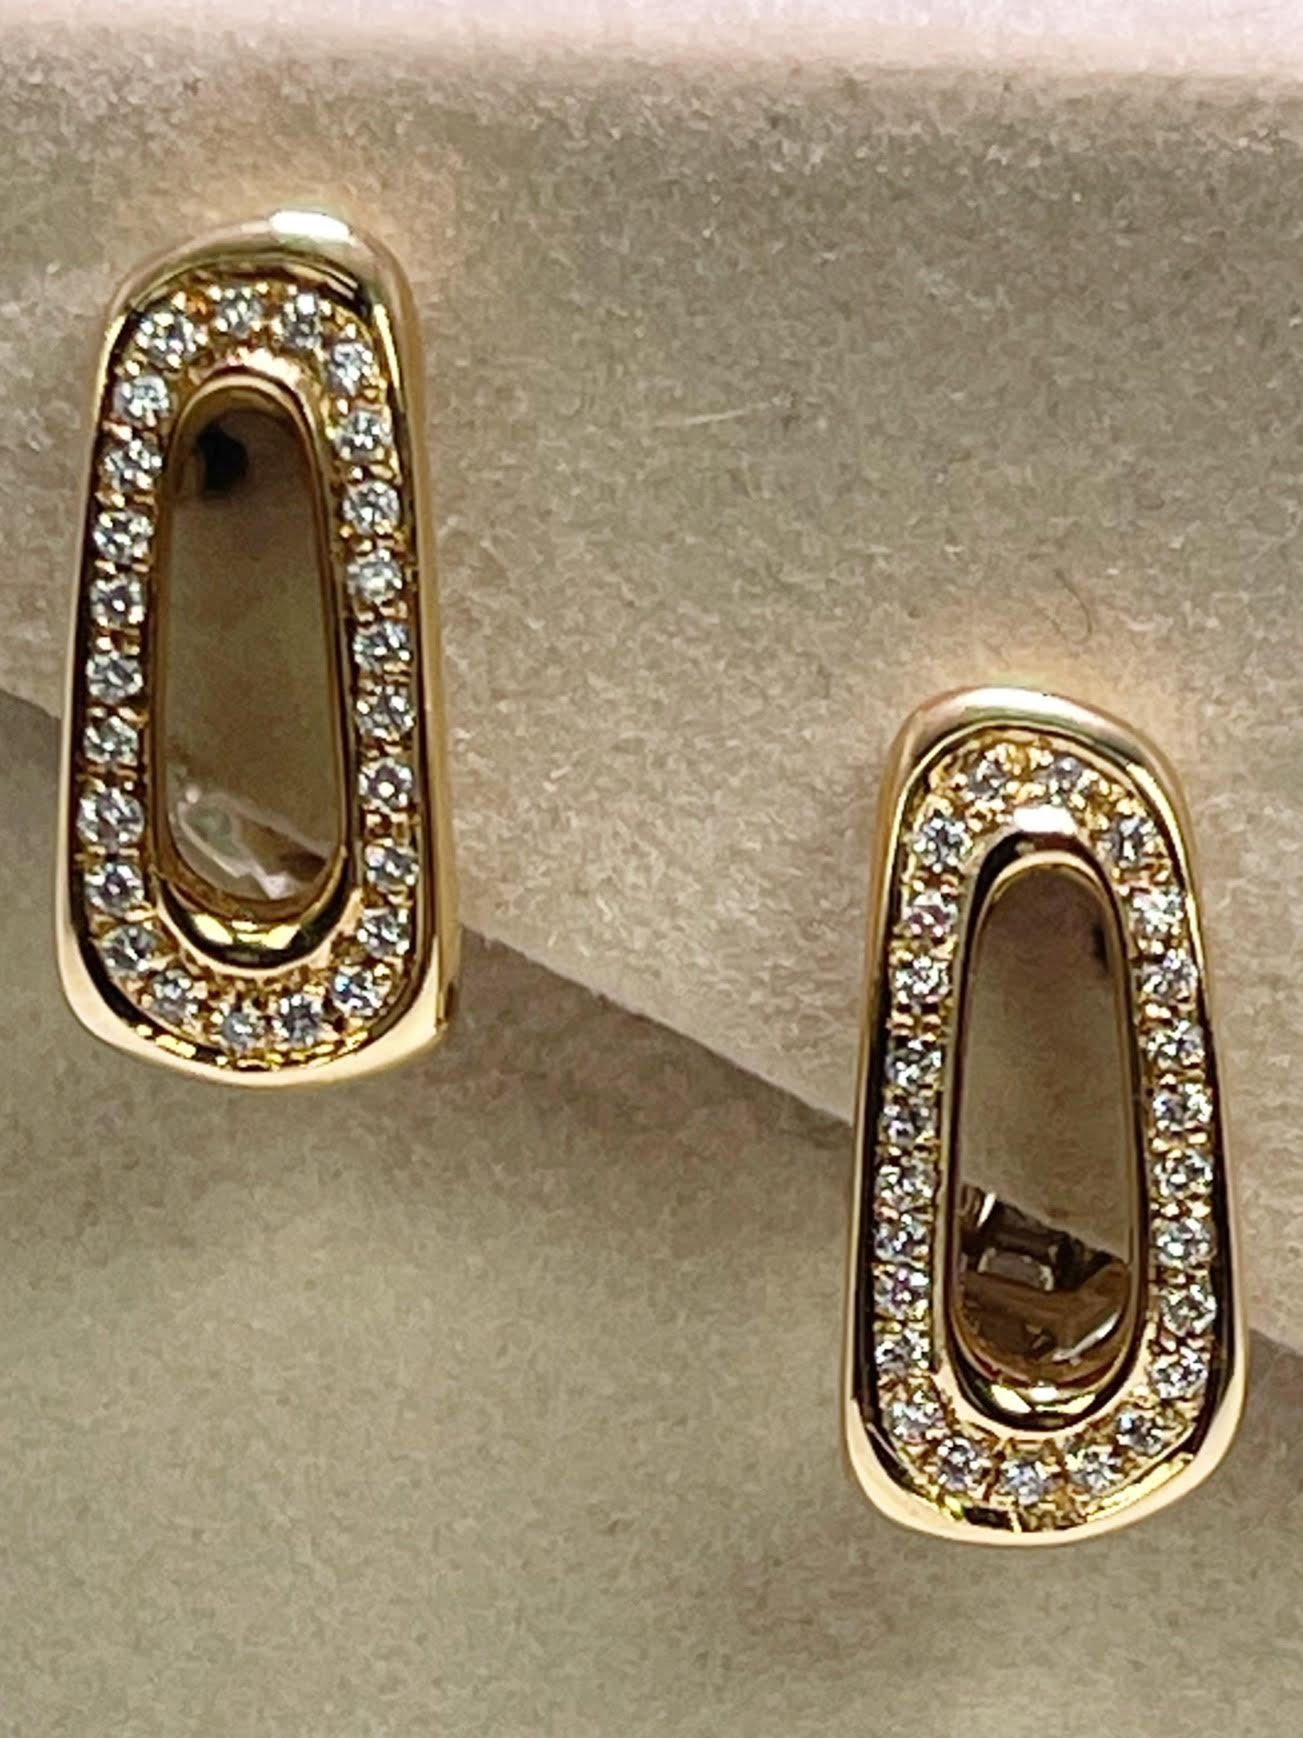 Stunning Antonini estate earrings made with natural diamonds in 18KT yellow gold. The backing is a secure and comfortable omega closure.
Earrings will come with a box and certificate of authenticity. Earrings are approximately half an inch